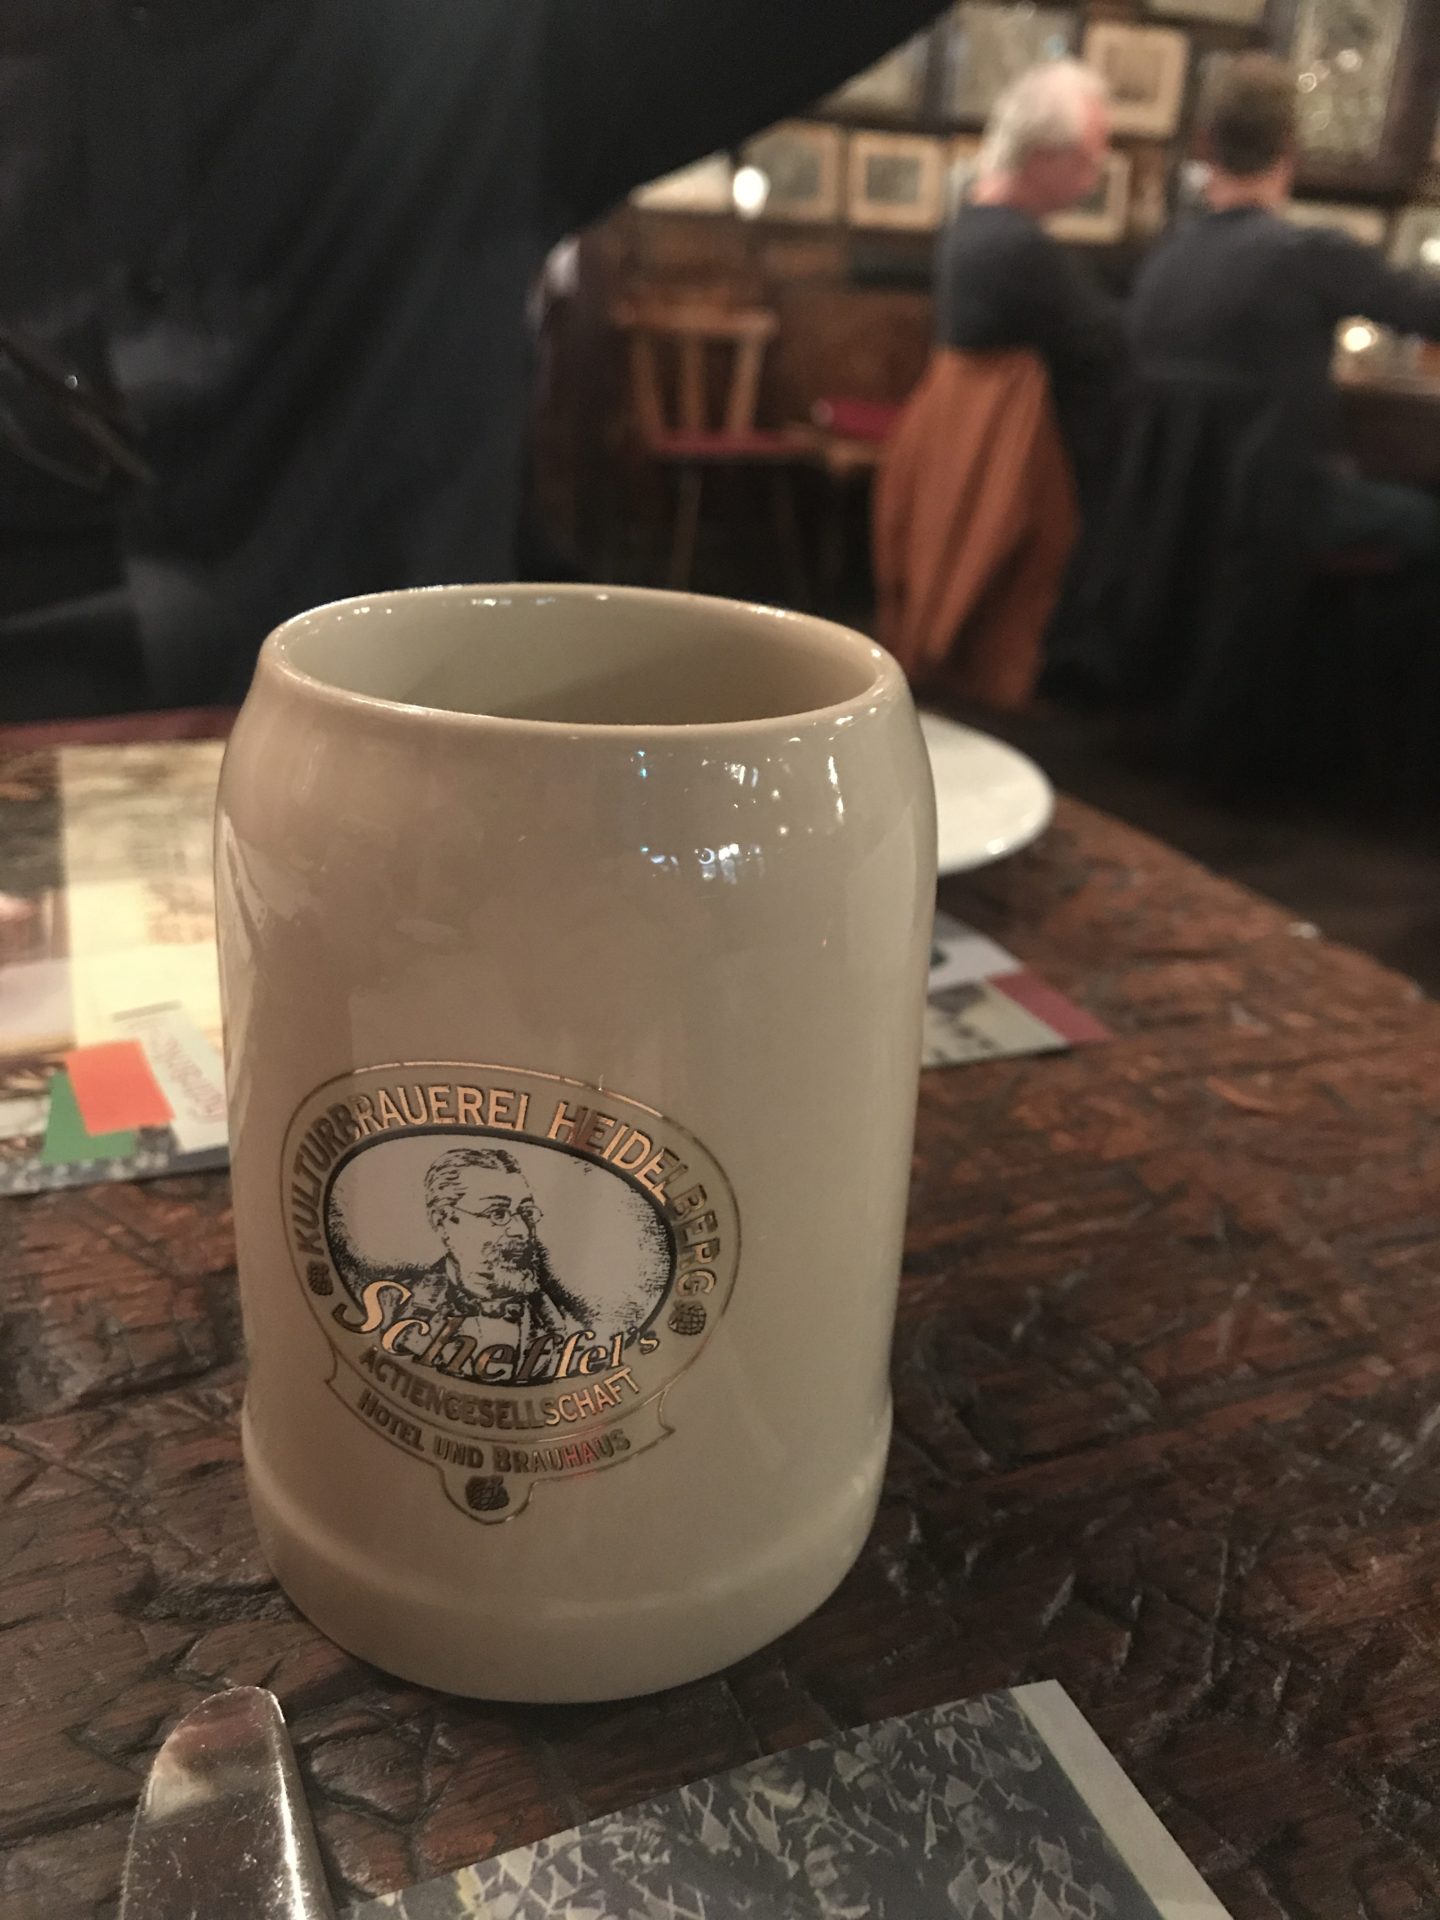 Ceramic German beer mug from the Kulturbrauerei in Heidelberg - an excellent option for what to buy in Germany. 